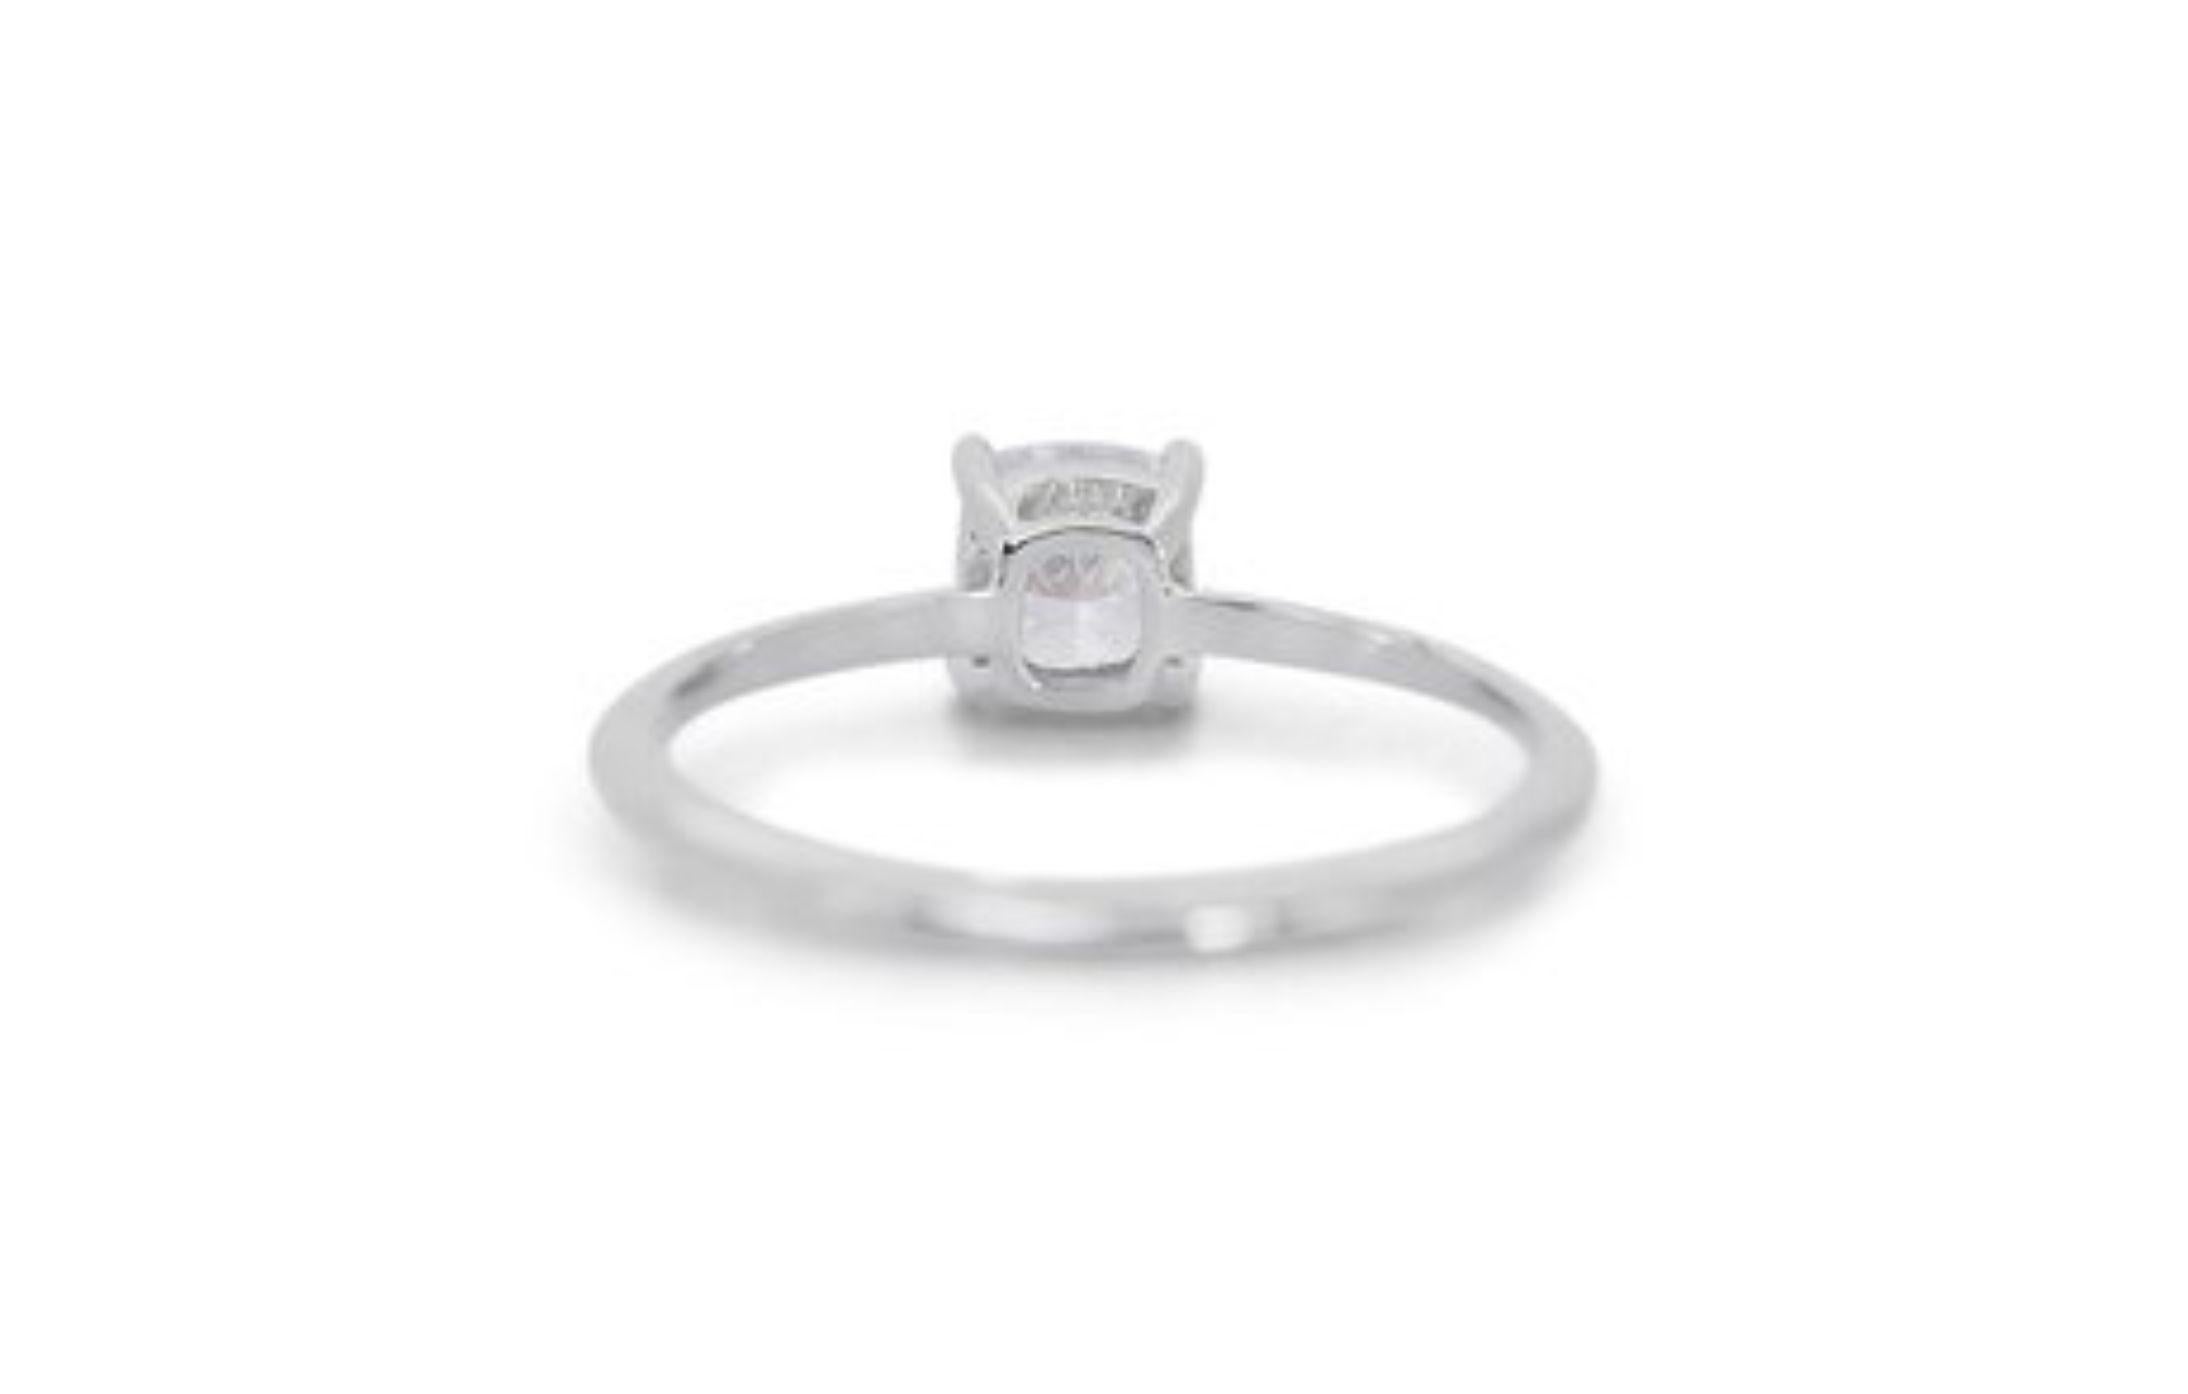 Dazzling 1.52 Carat Cushion Modified Diamond Ring in 18K White Gold For Sale 4